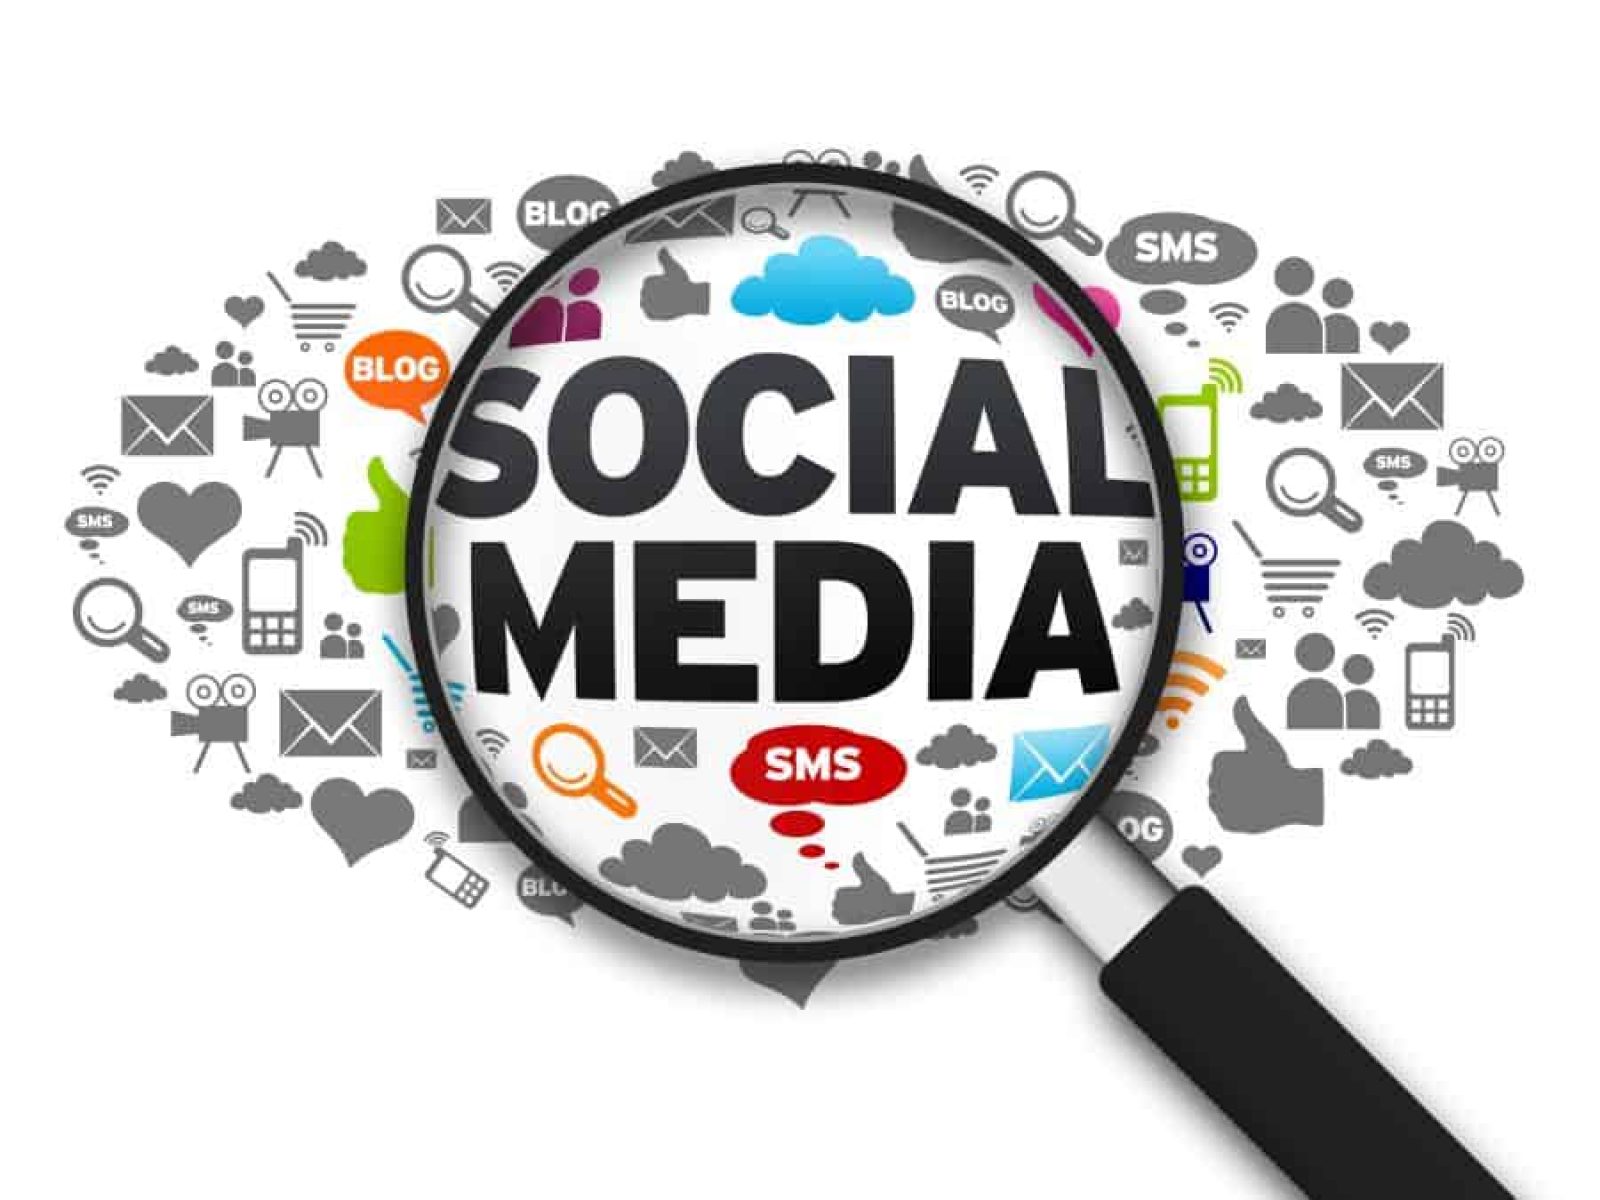 Social Media Marketing: What is it and how can you take advantage of it?